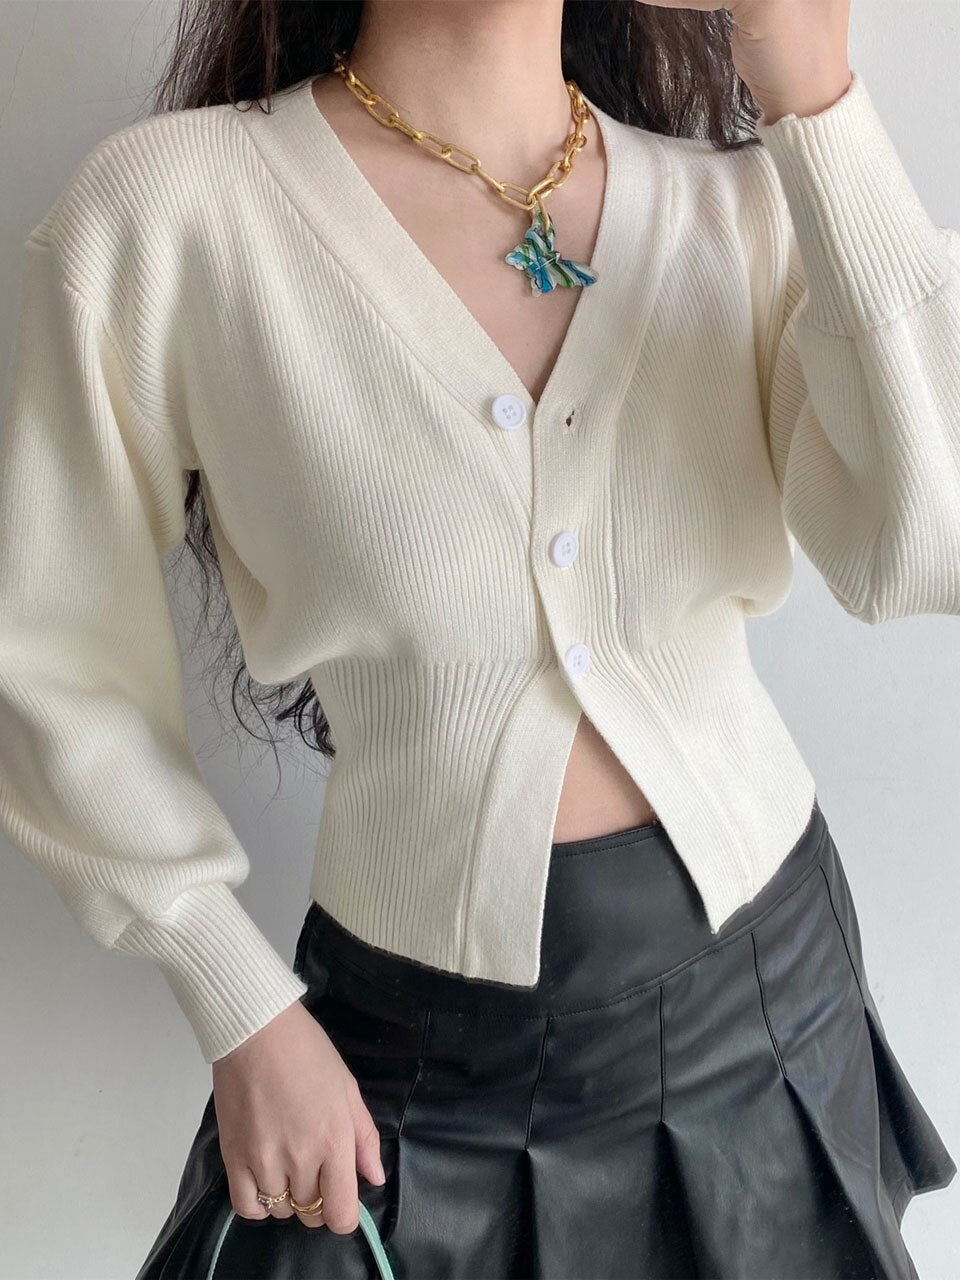 Thanksgiving Day Gifts Knitting V Neck Button Cardigan Women Long Sleeve Solid Crop Top Autumn Casual New Streetwear Outerwear Sweater Female Clothes